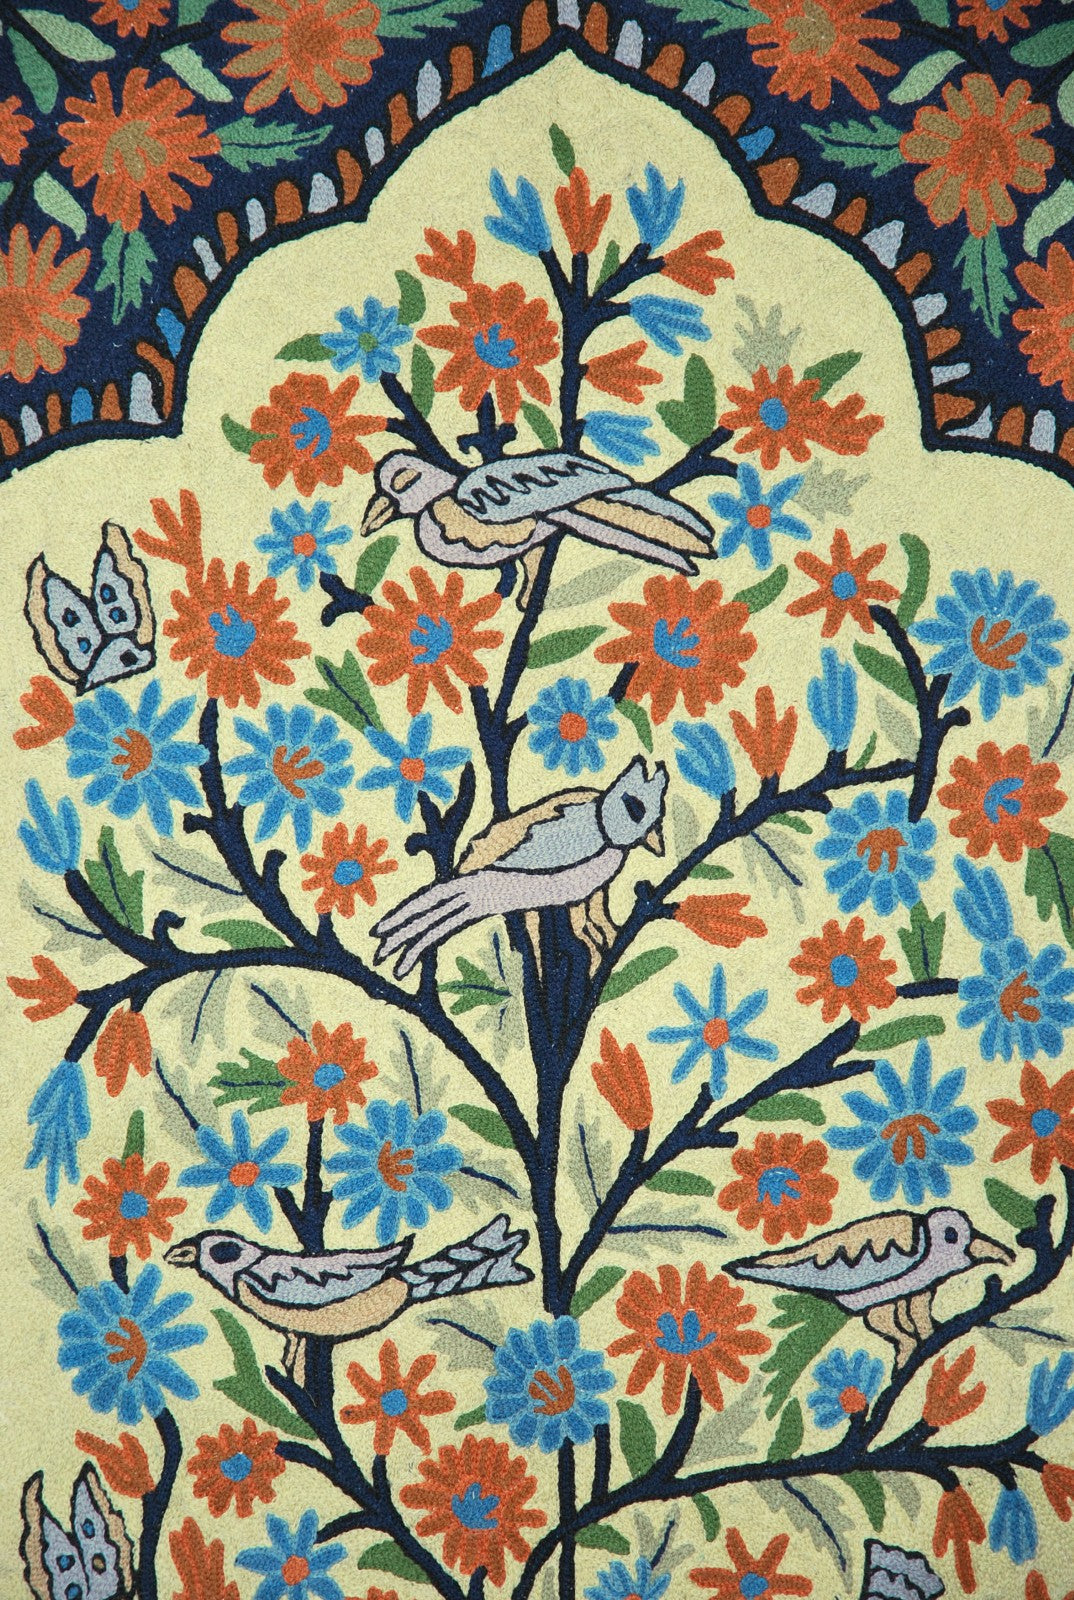 ChainStitch Tapestry Woolen Area Rug "Tree of Life Birds", Multicolor Embroidery 3x5 feet #CWR15124